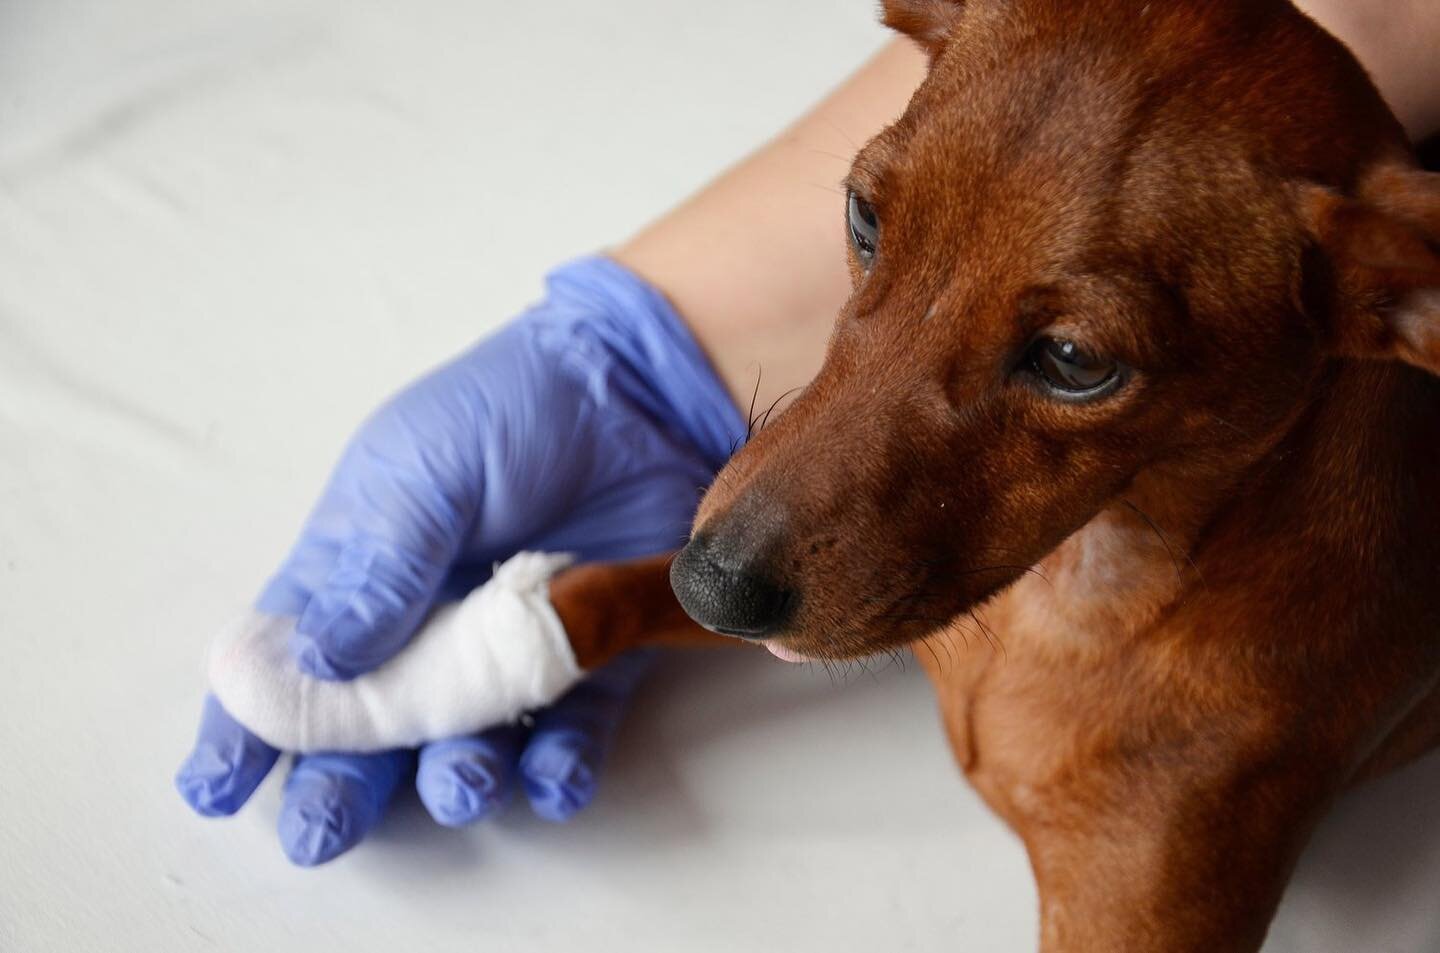 Do you know how to act in an EMERGENCY case from your DOG? 🚨
Grab your spot on our first aid training THIS SATURDAY to learn how to act and get a first aid kit to be well prepared if it is needed!
🚑 Book now on our website under dog school, group l